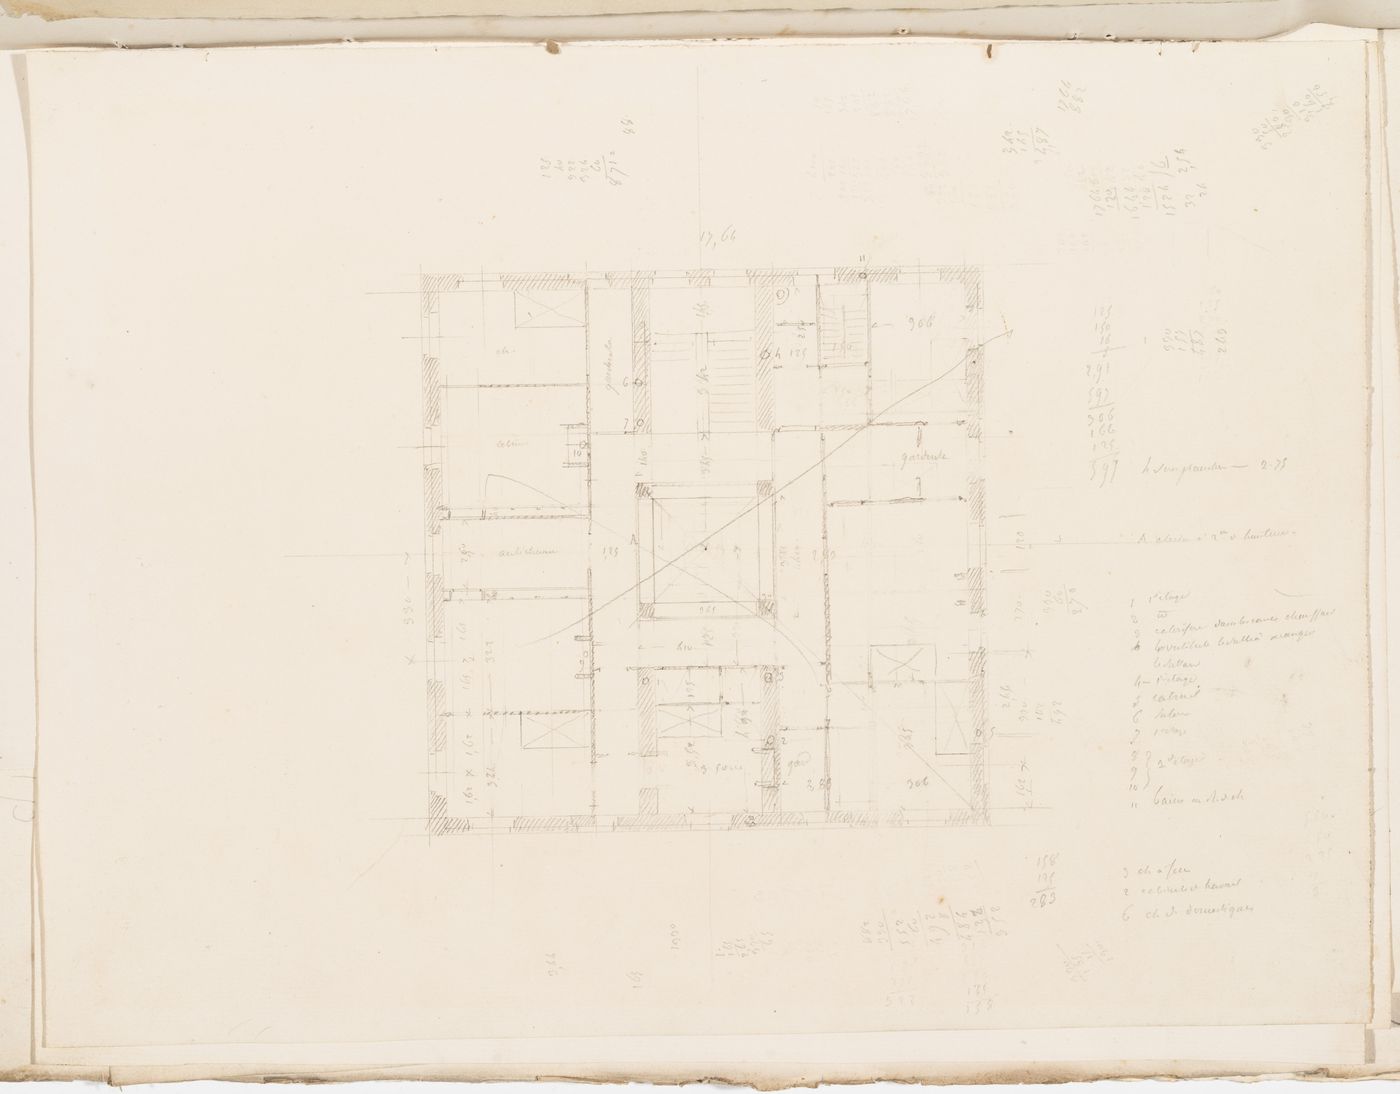 Project no. 8 for a country house for comte Treilhard: Second floor plan